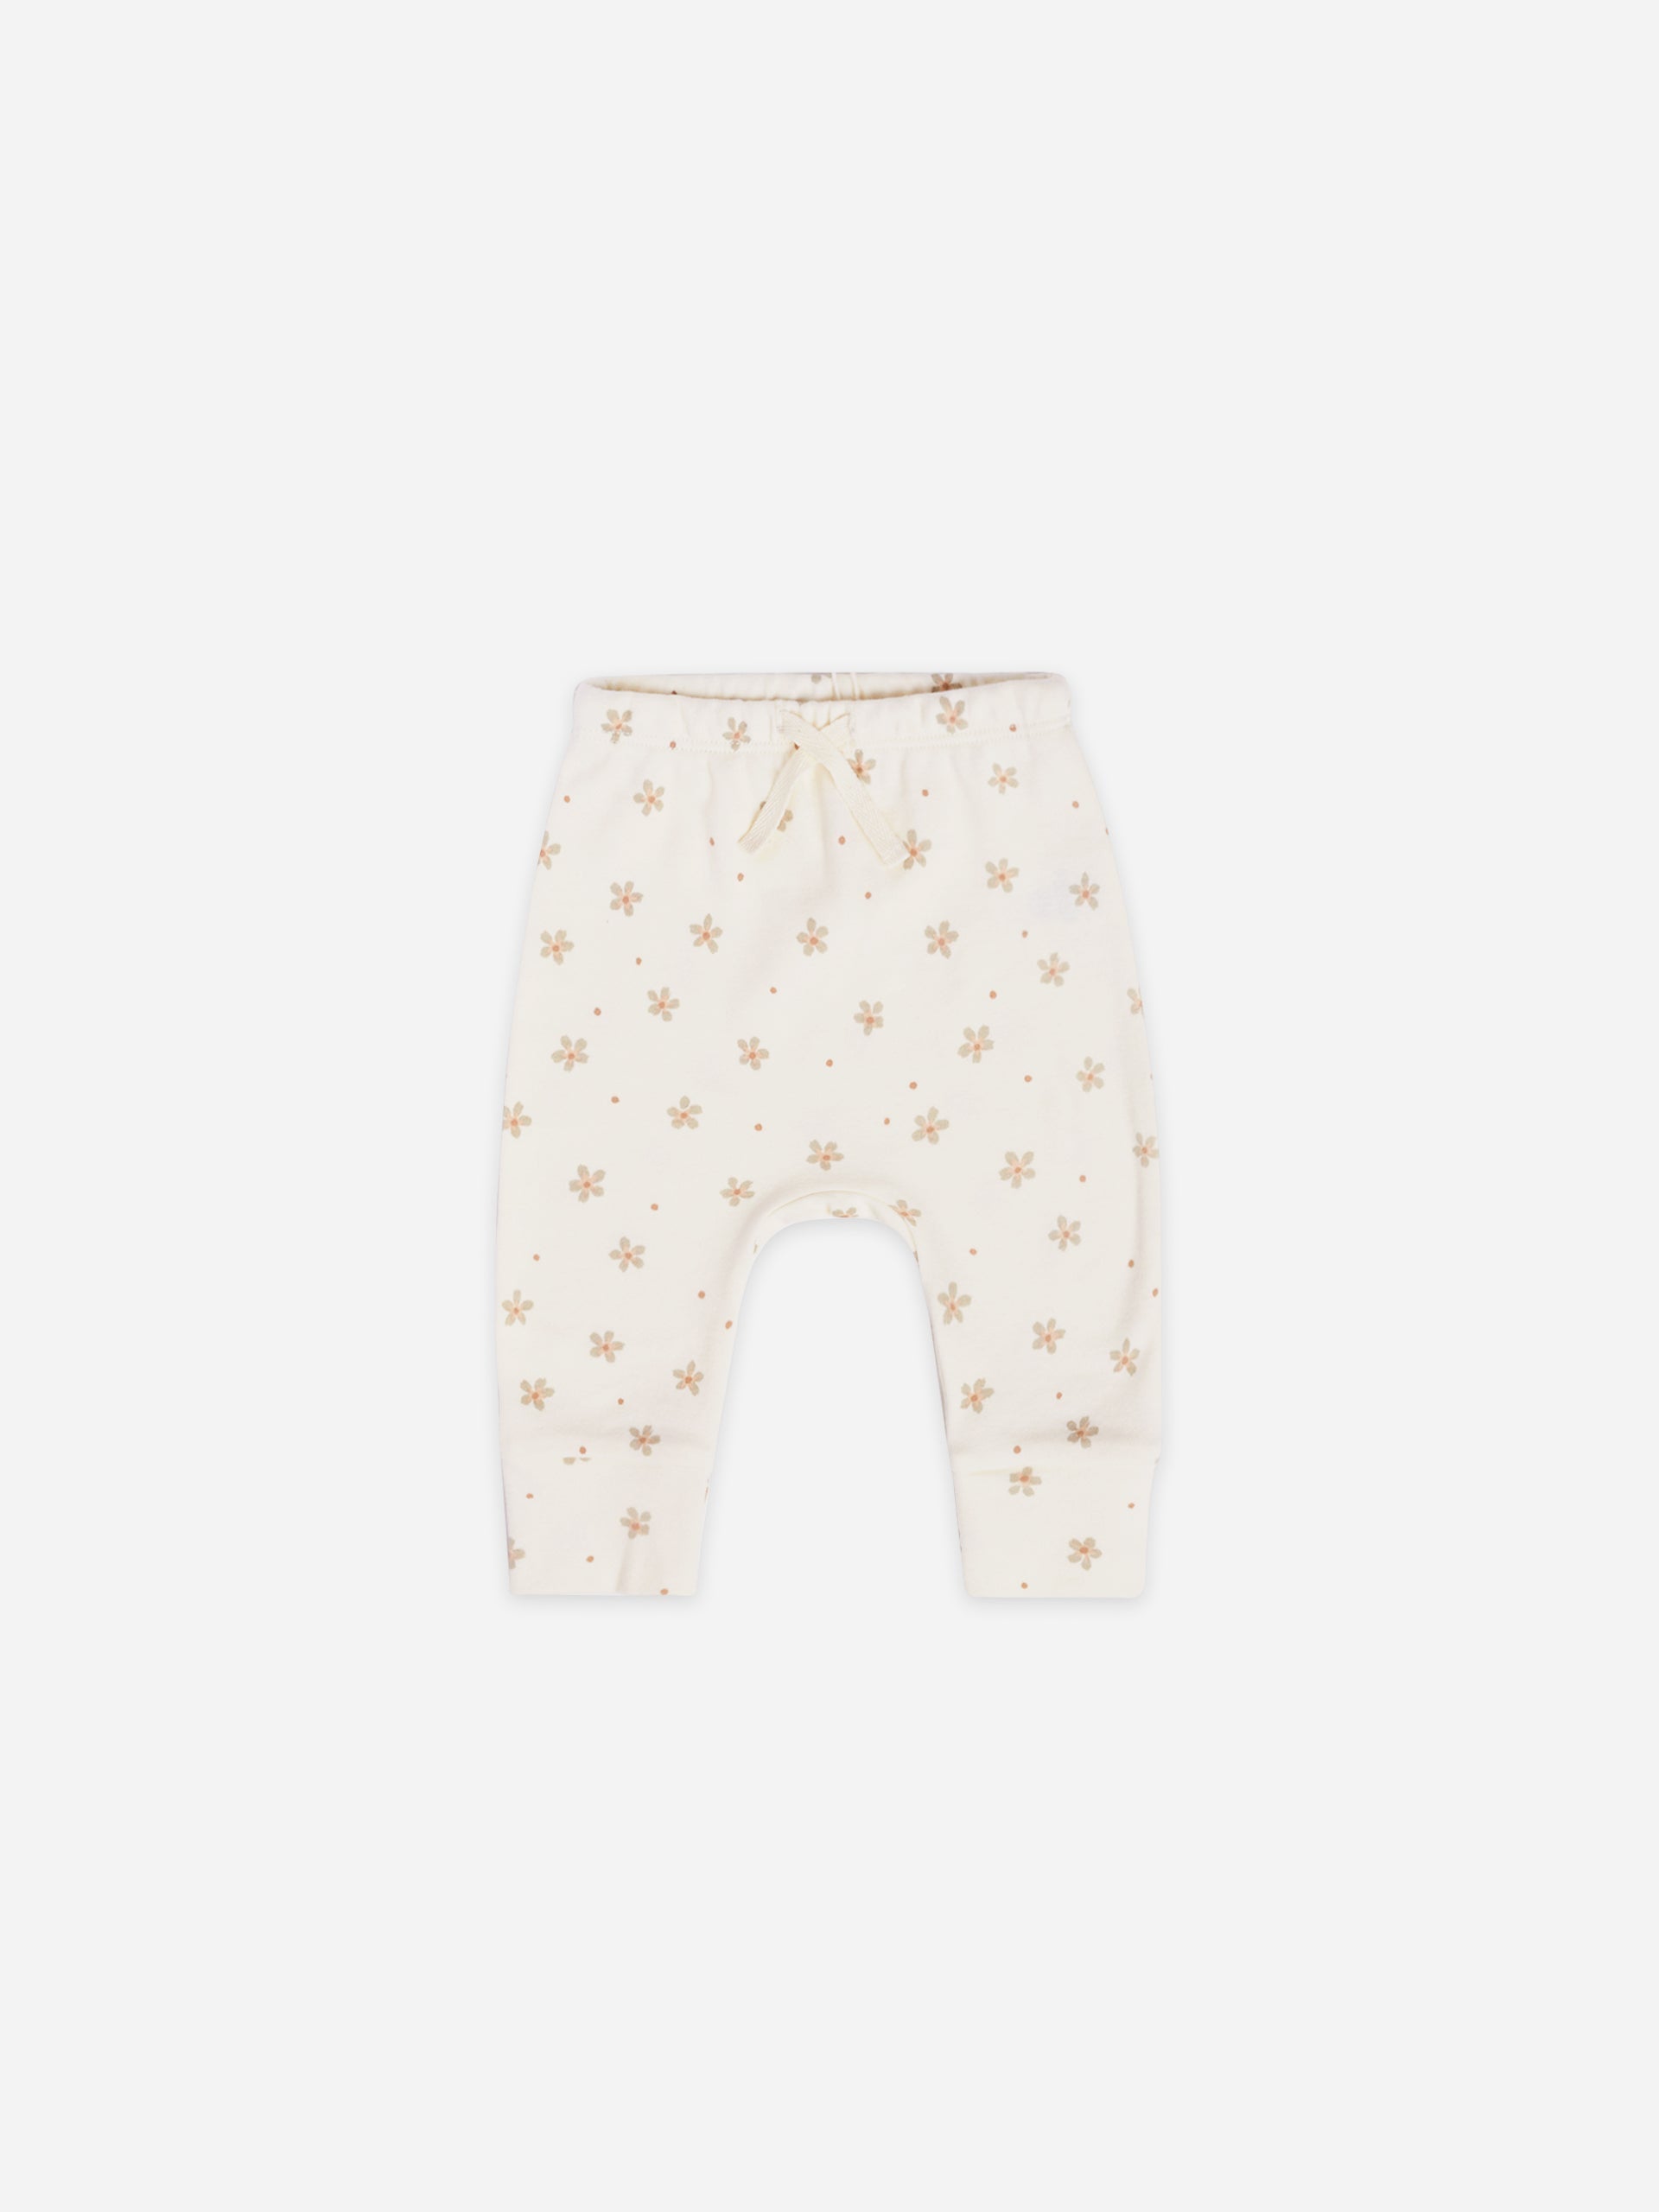 drawstring pant | dotty floral - Quincy Mae | Baby Basics | Baby Clothing | Organic Baby Clothes | Modern Baby Boy Clothes |